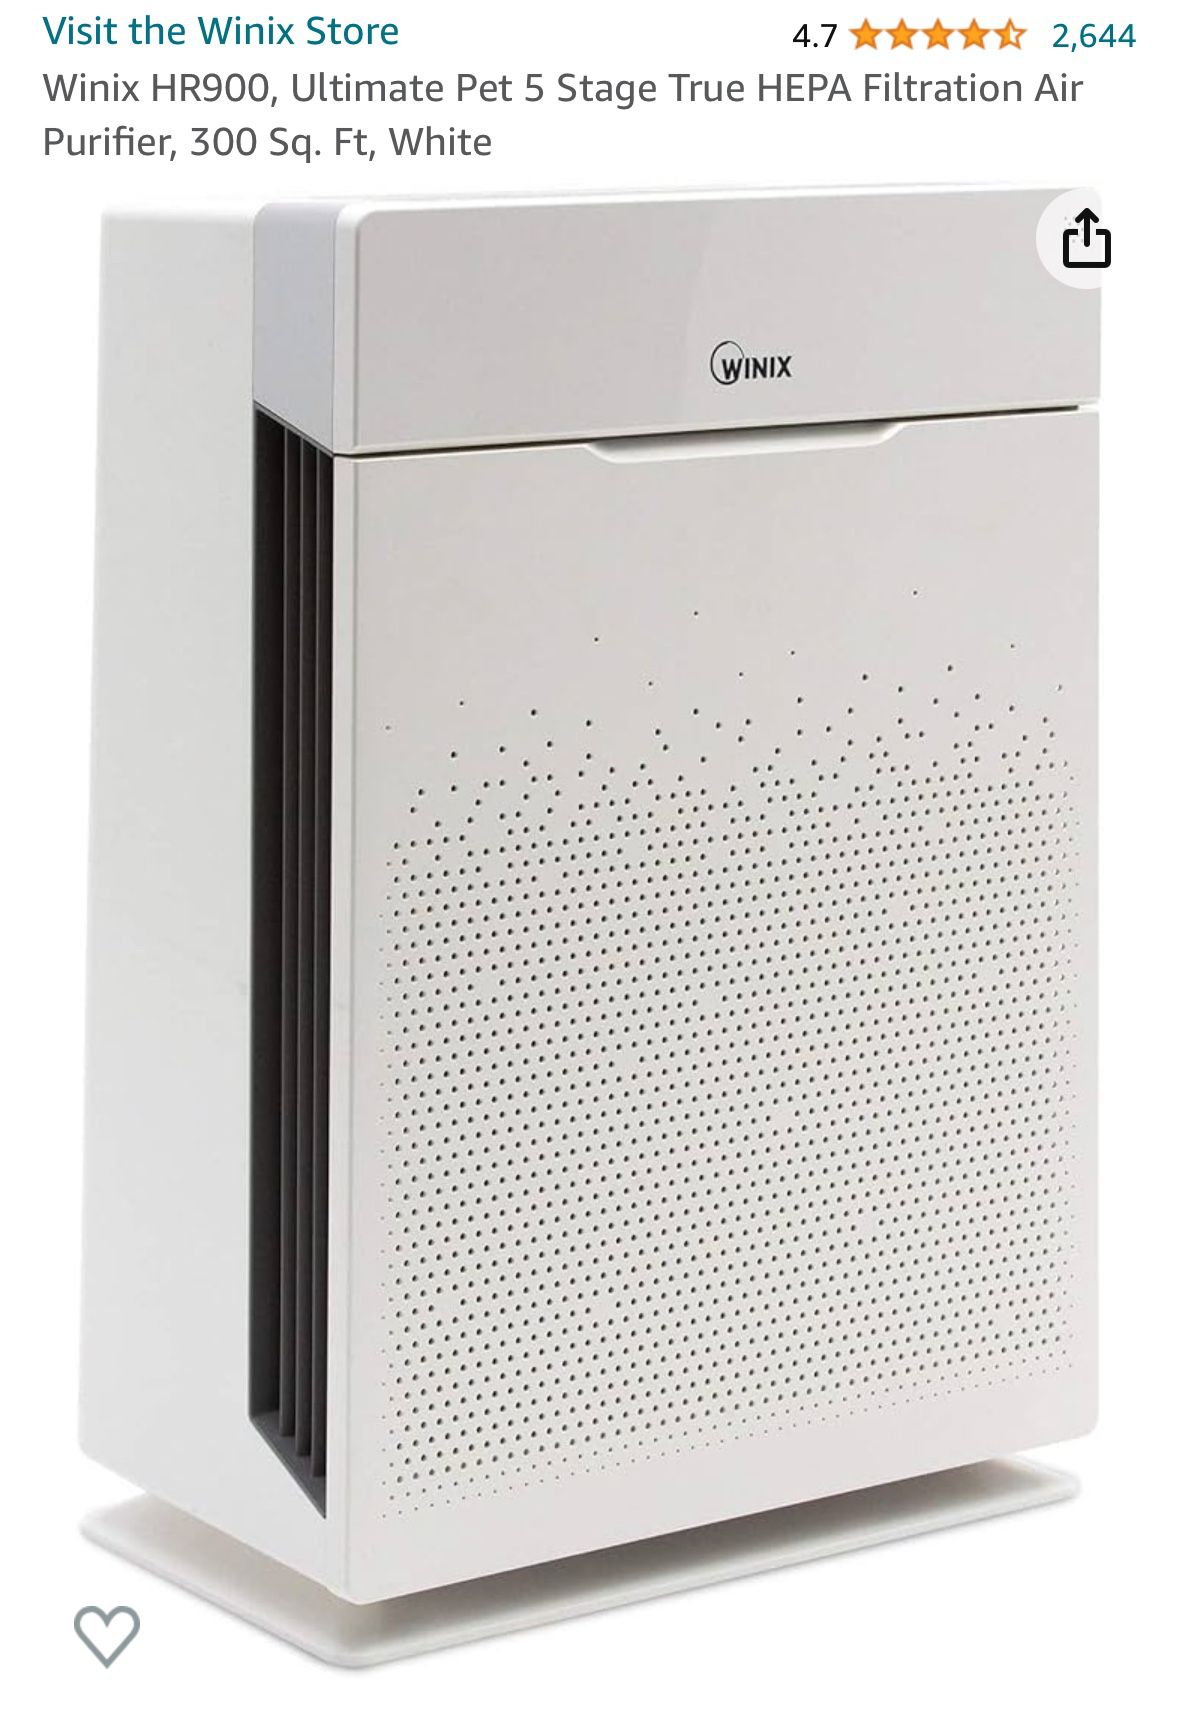 Winix HR900 Ultimate Pet 5 Stage HEPA filtration Air purifier